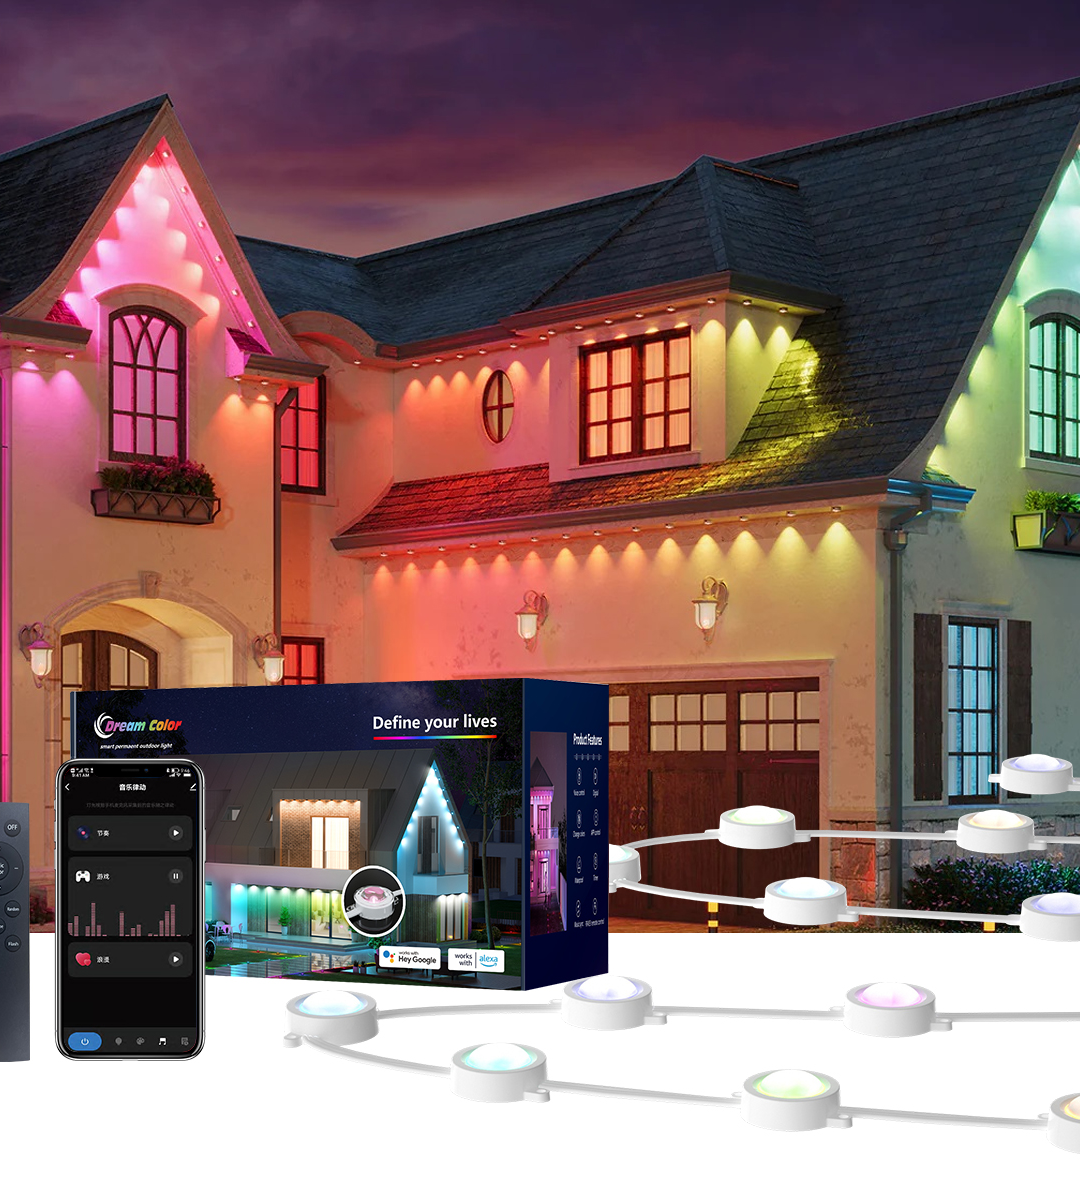 CL LIGHTING's Interactive Holiday Lights: Engaging Displays for Public Spaces